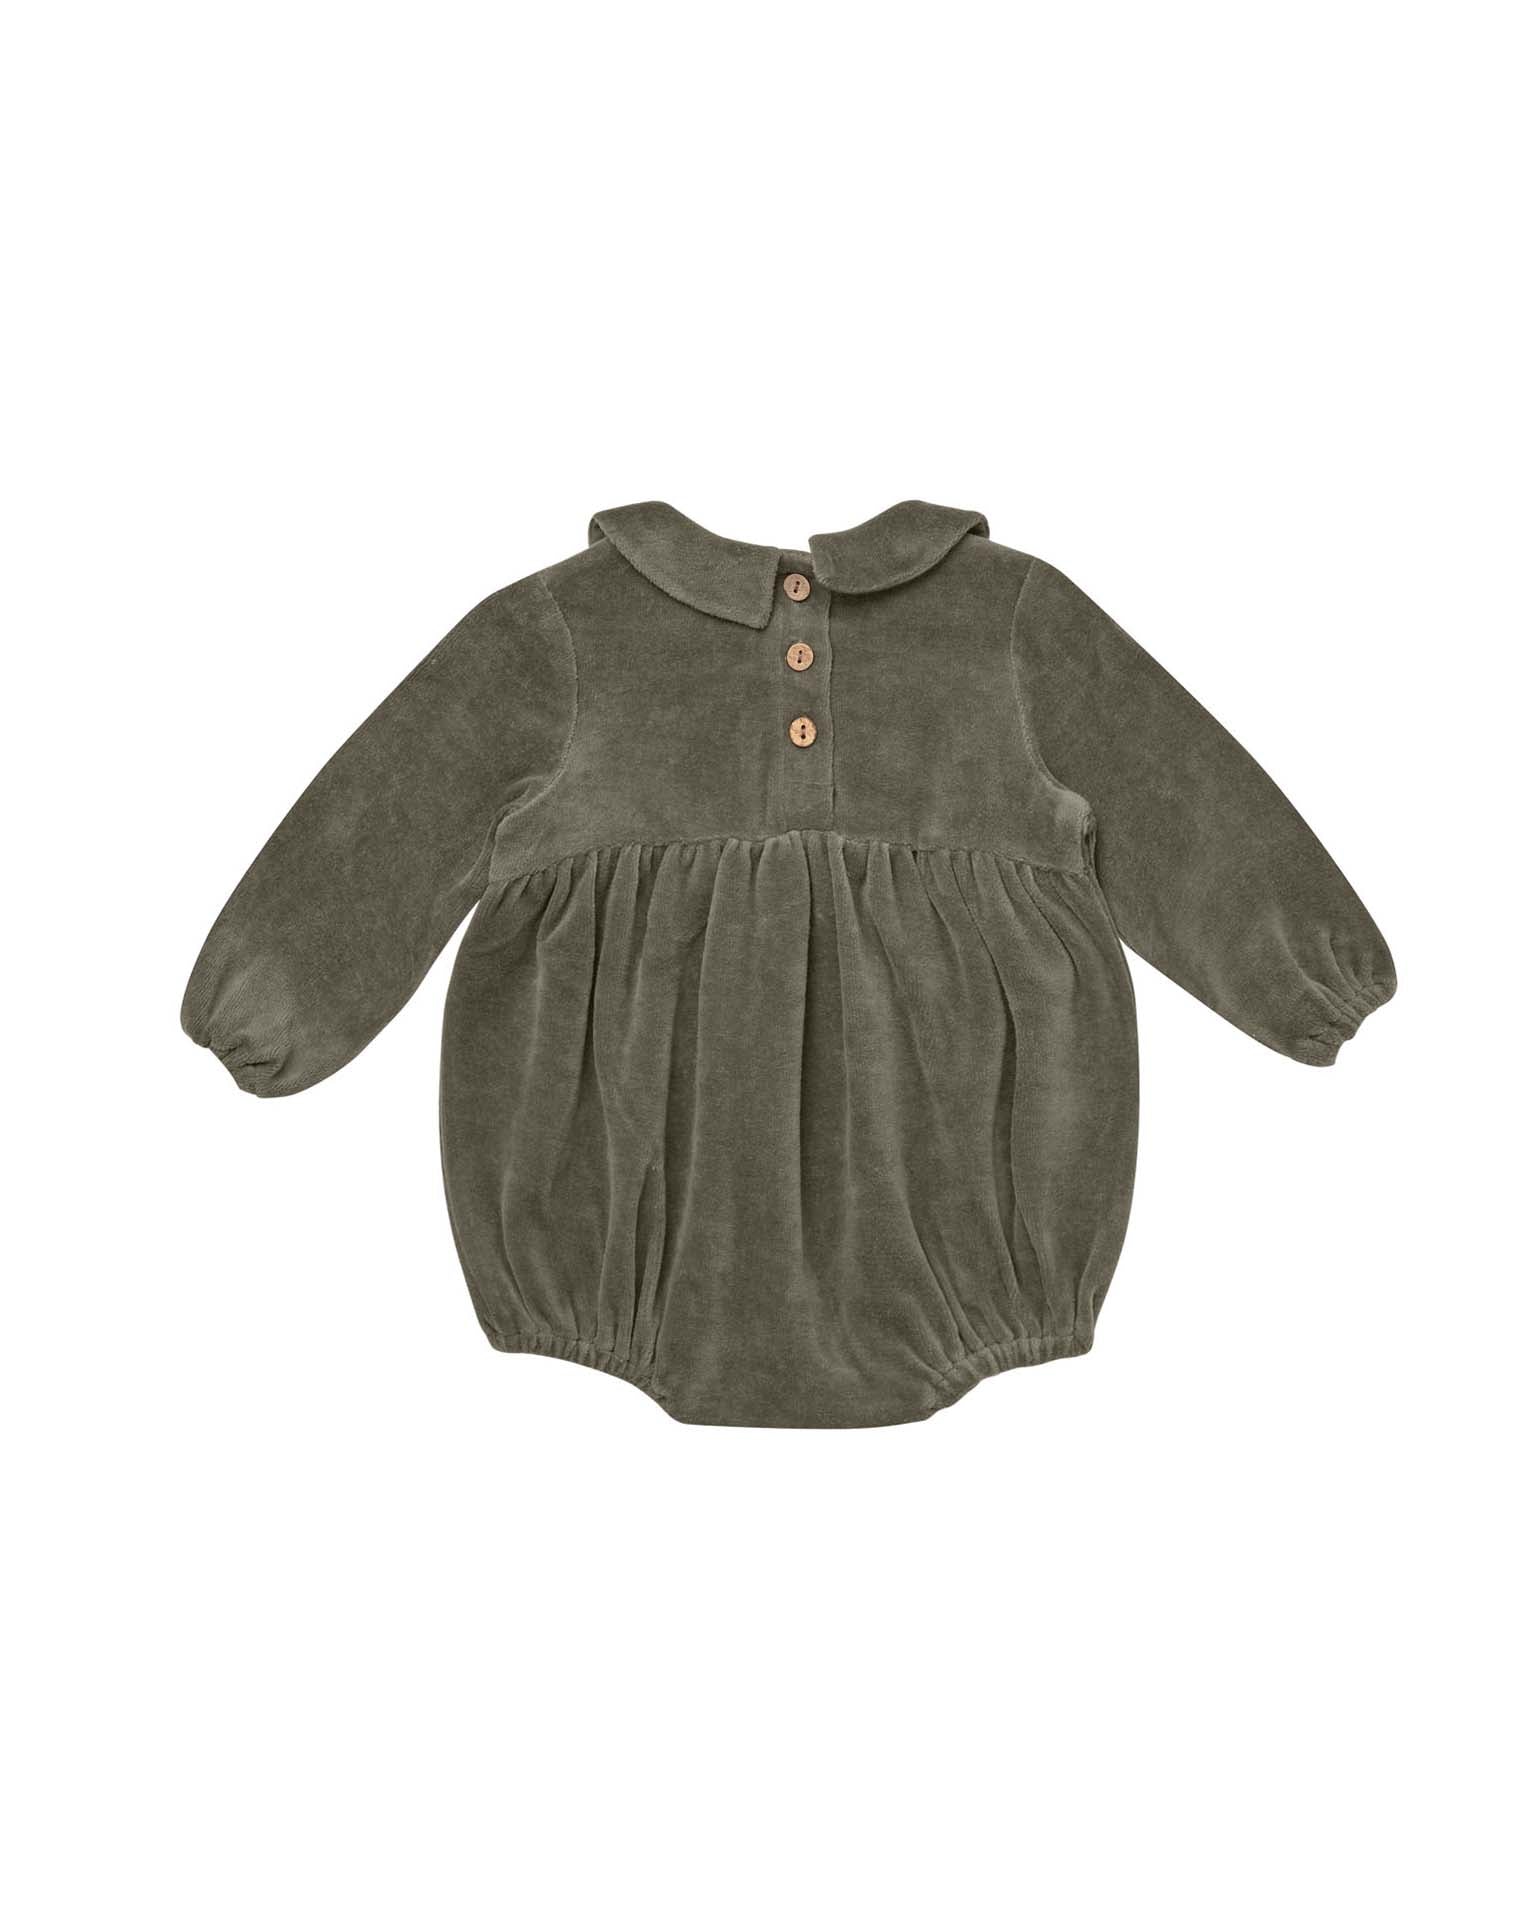 Little quincy mae BABY peter pan romper in forest